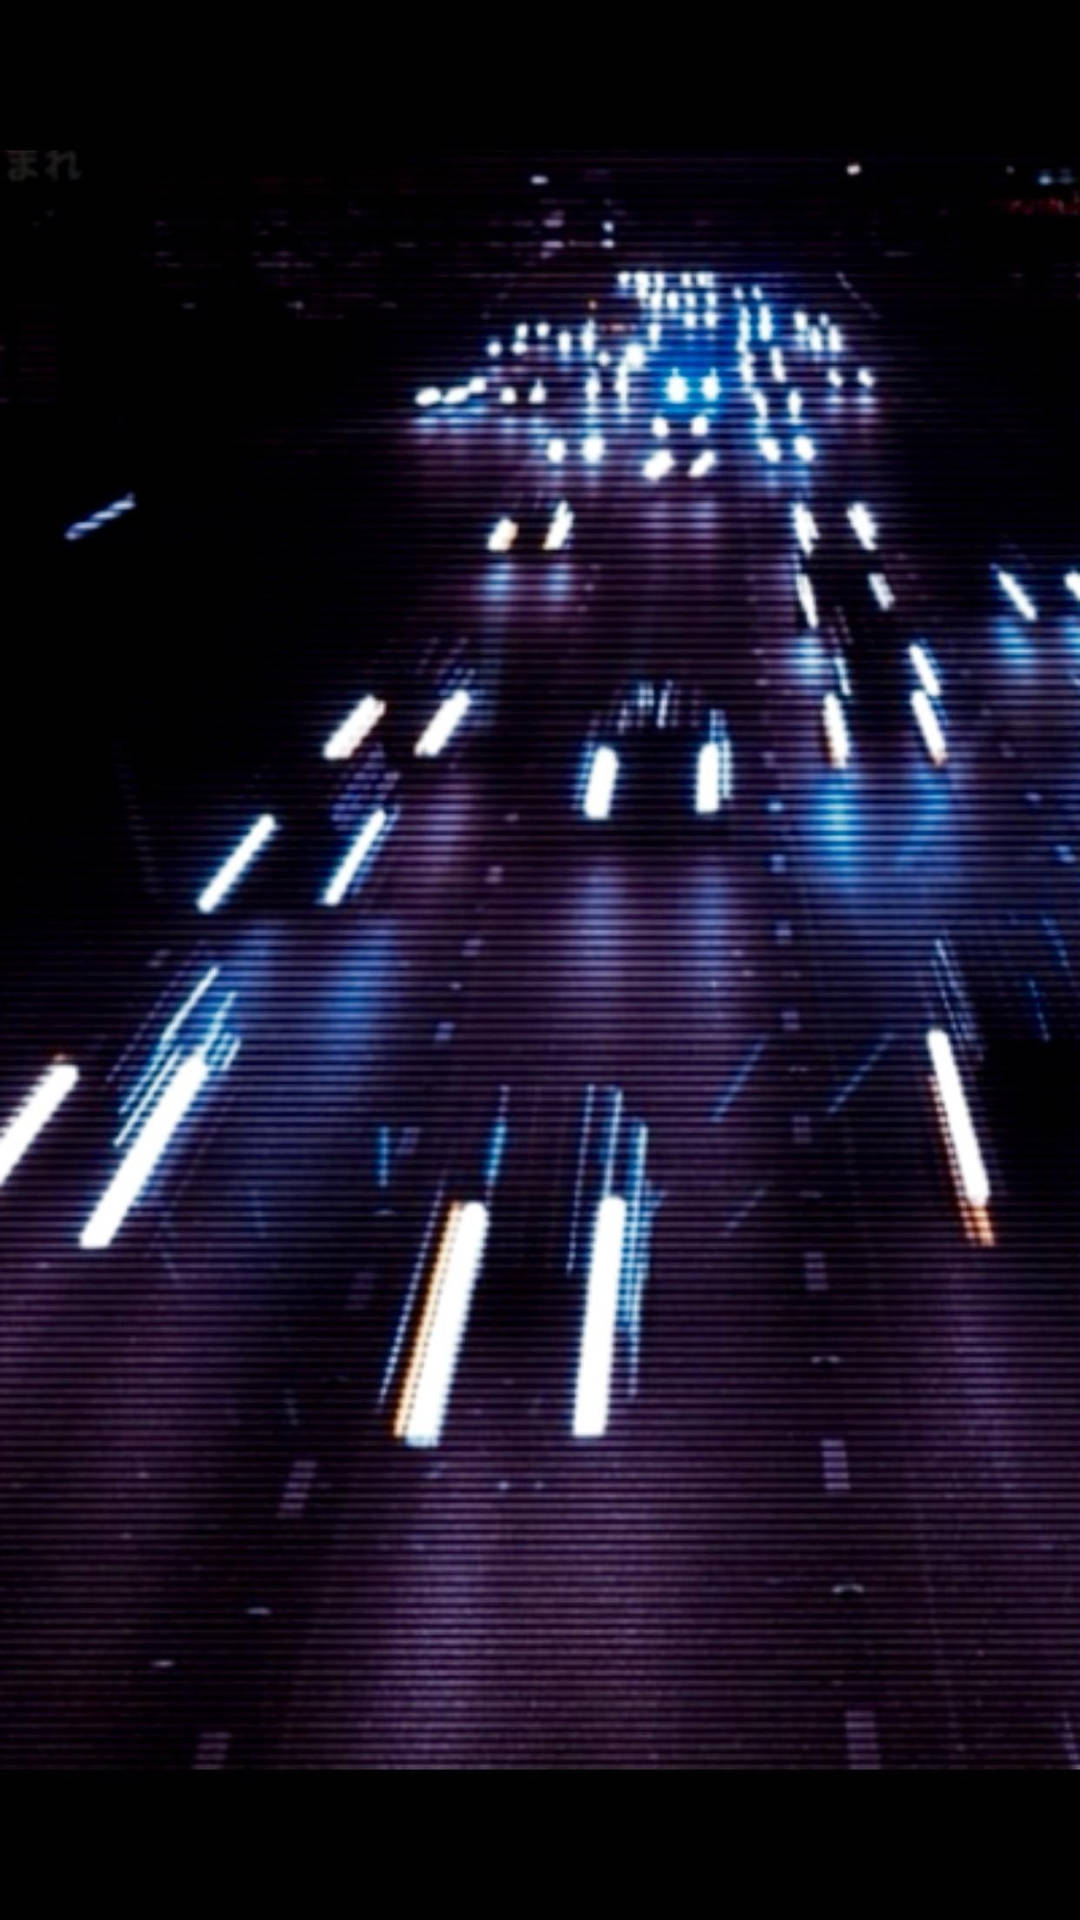 Blurry Cars In A Busy Road Dark Grunge Aesthetic Wallpaper